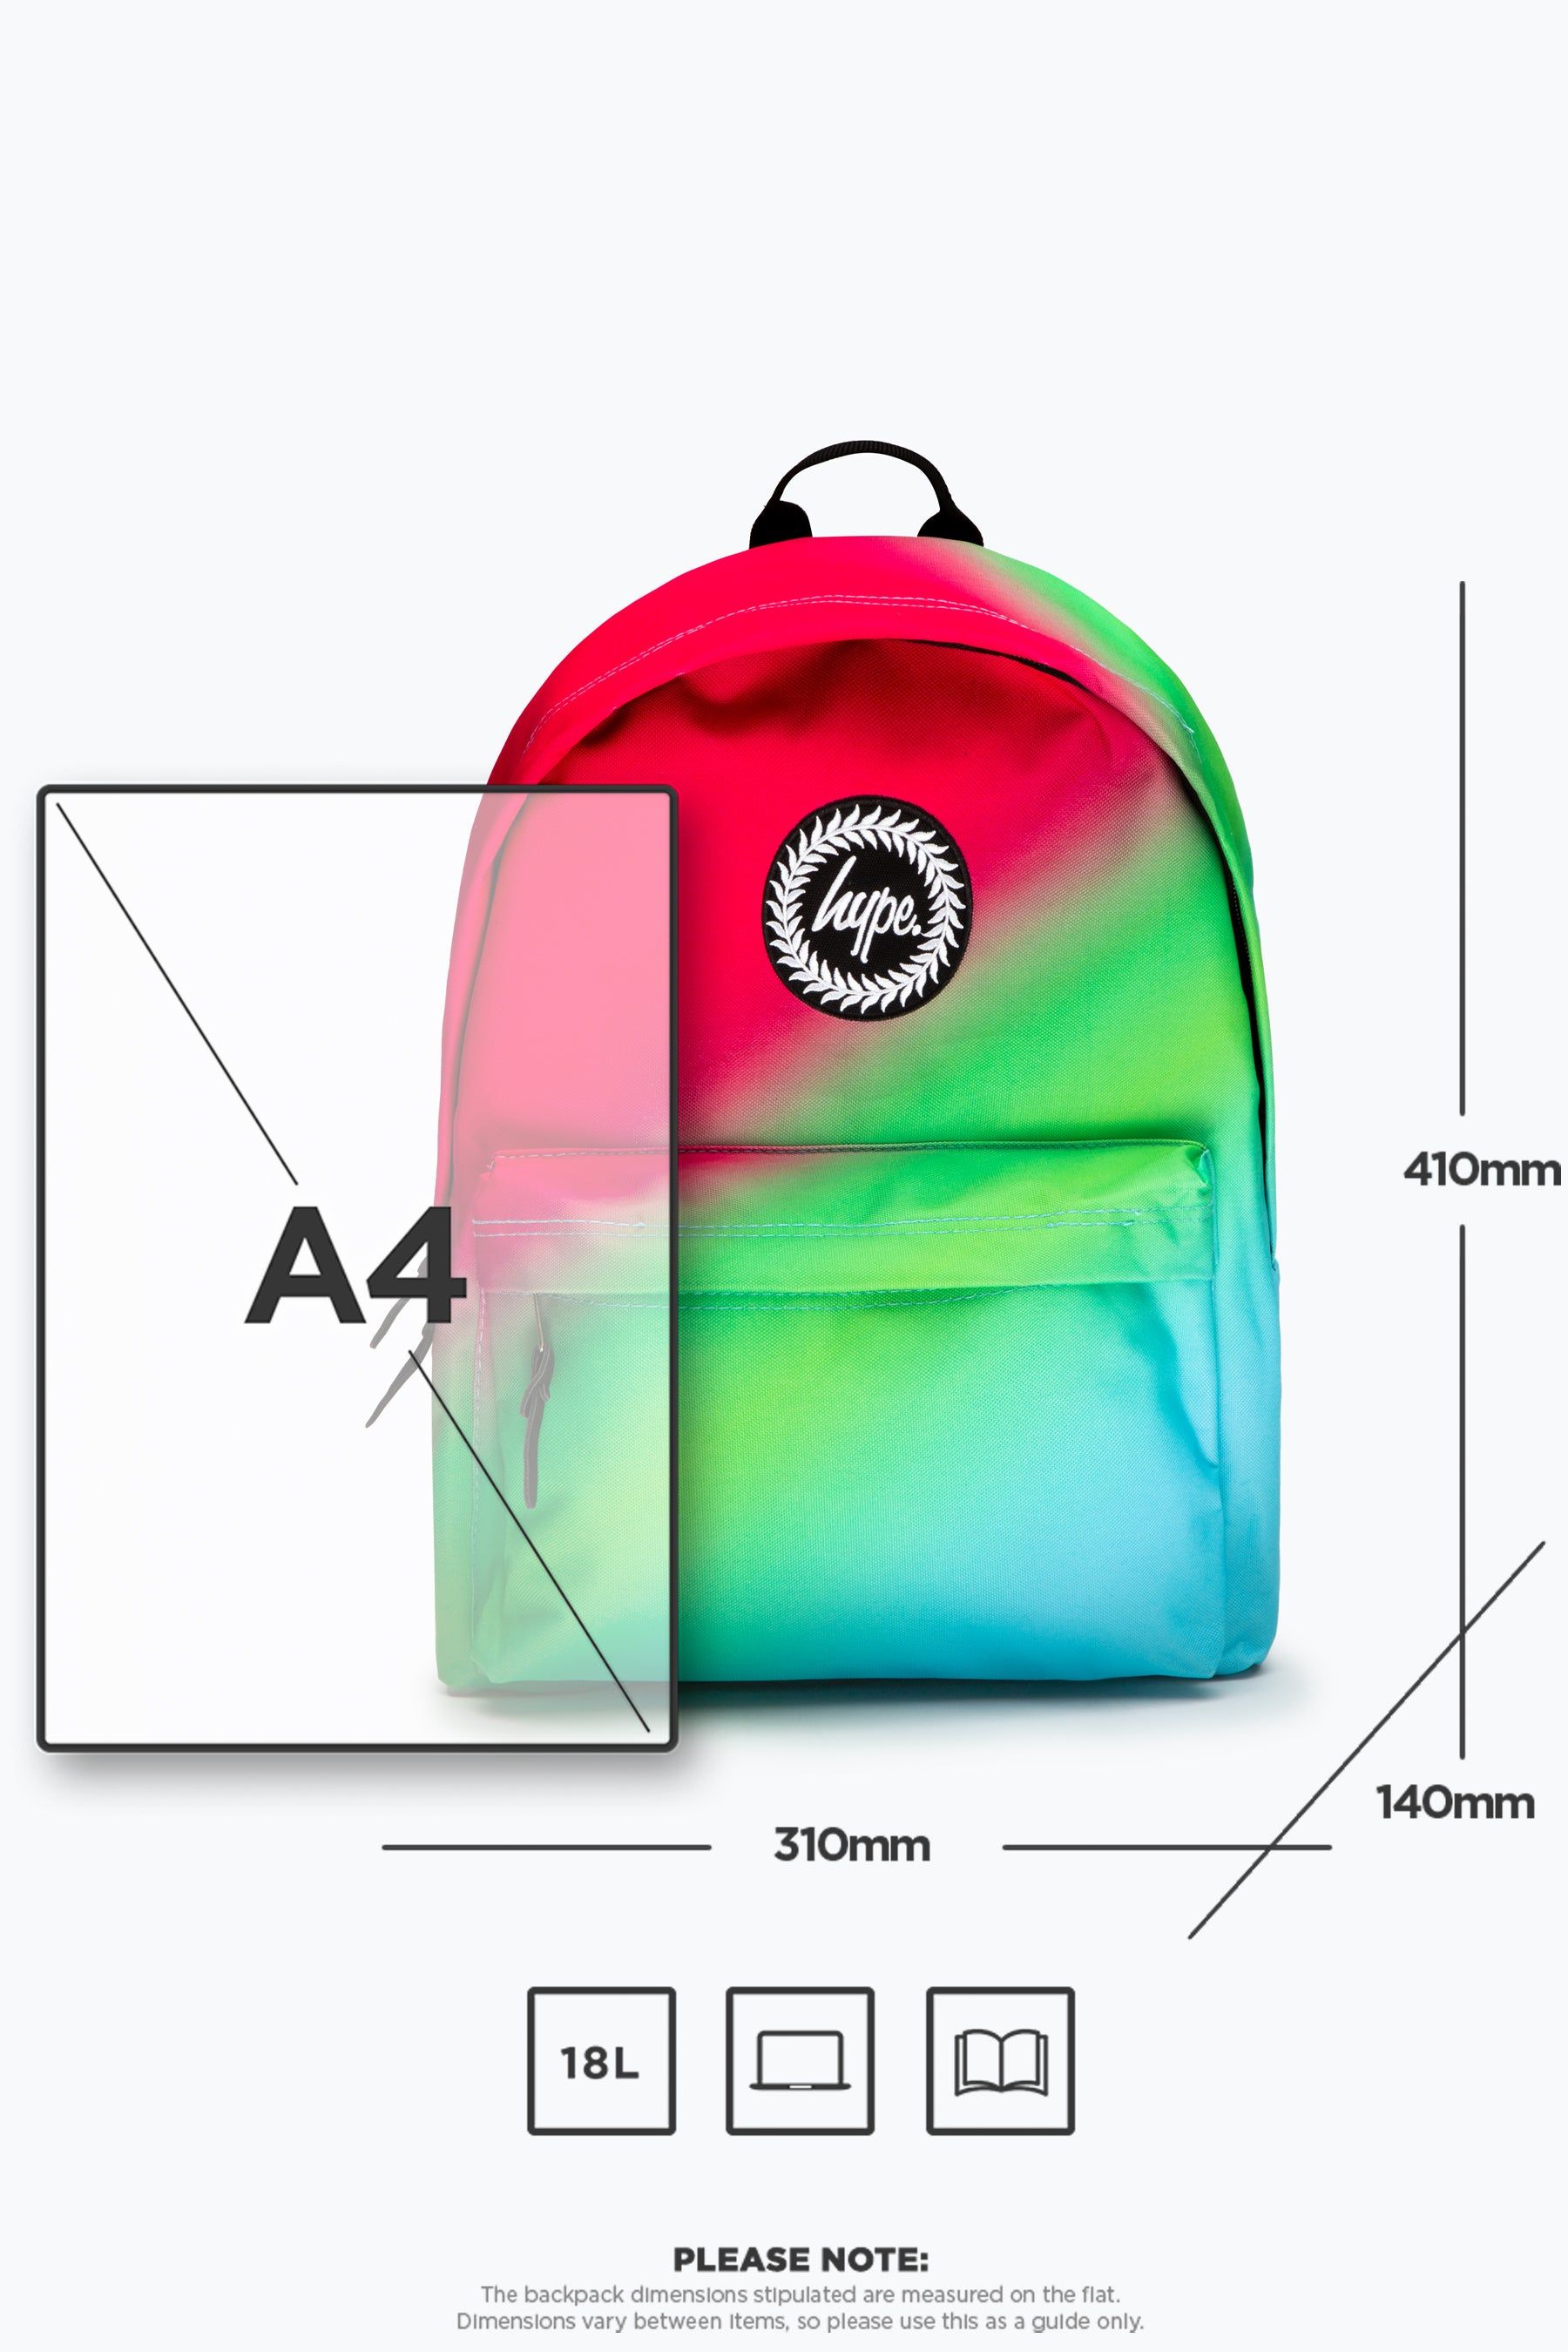 The perfect backpack does exist, and you're looking right at it. The HYPE. blue fade backpack is designed in our signature fade print in a pink, blue and green colour palette. With the iconic HYPE. crest badge, front pocket and embossed zip pullers. This backpack measures at 42 cms x 30 cms x 12cms, creating the perfect size to transport your goods from home to school and school to home. The straps offer supreme comfort with just the right amount of padding you need from your new backpack. Wipe clean only.